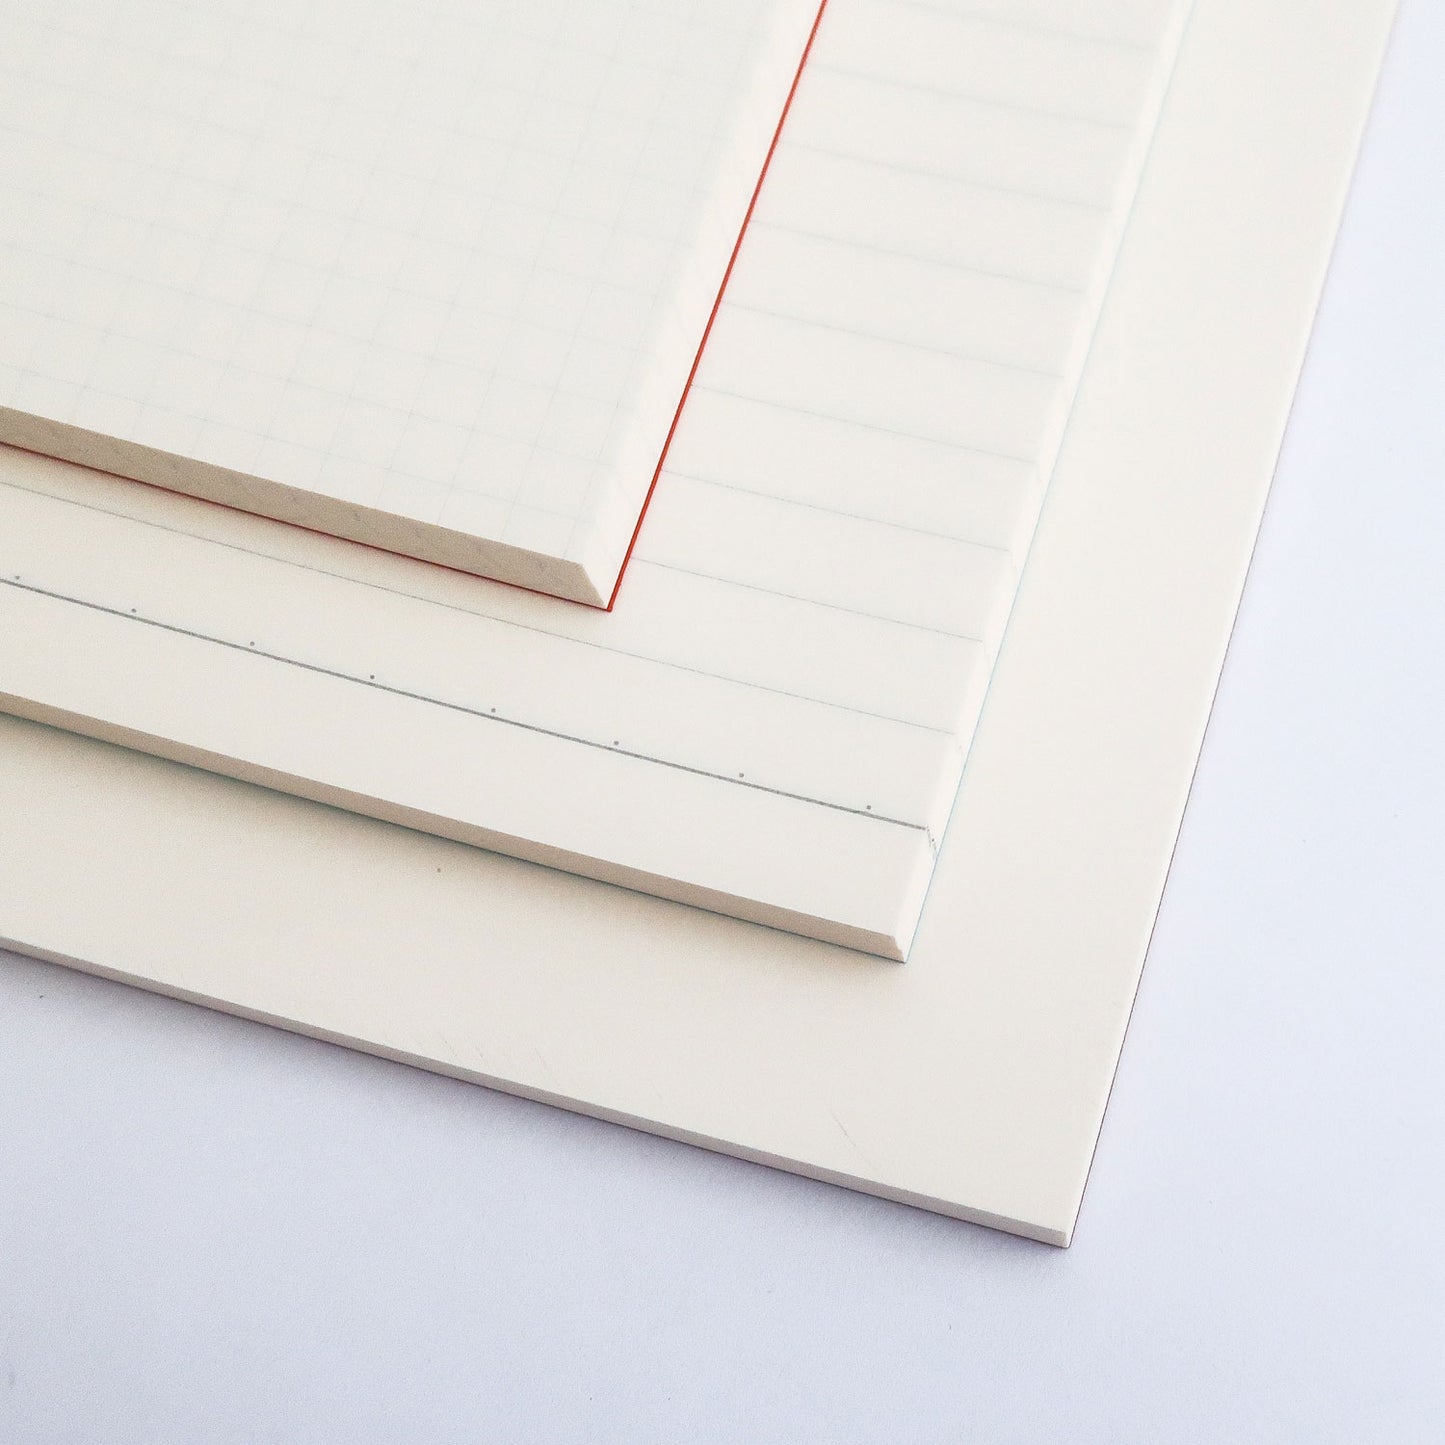 cream colored interior notebook pages that come gridded, ruled and plain